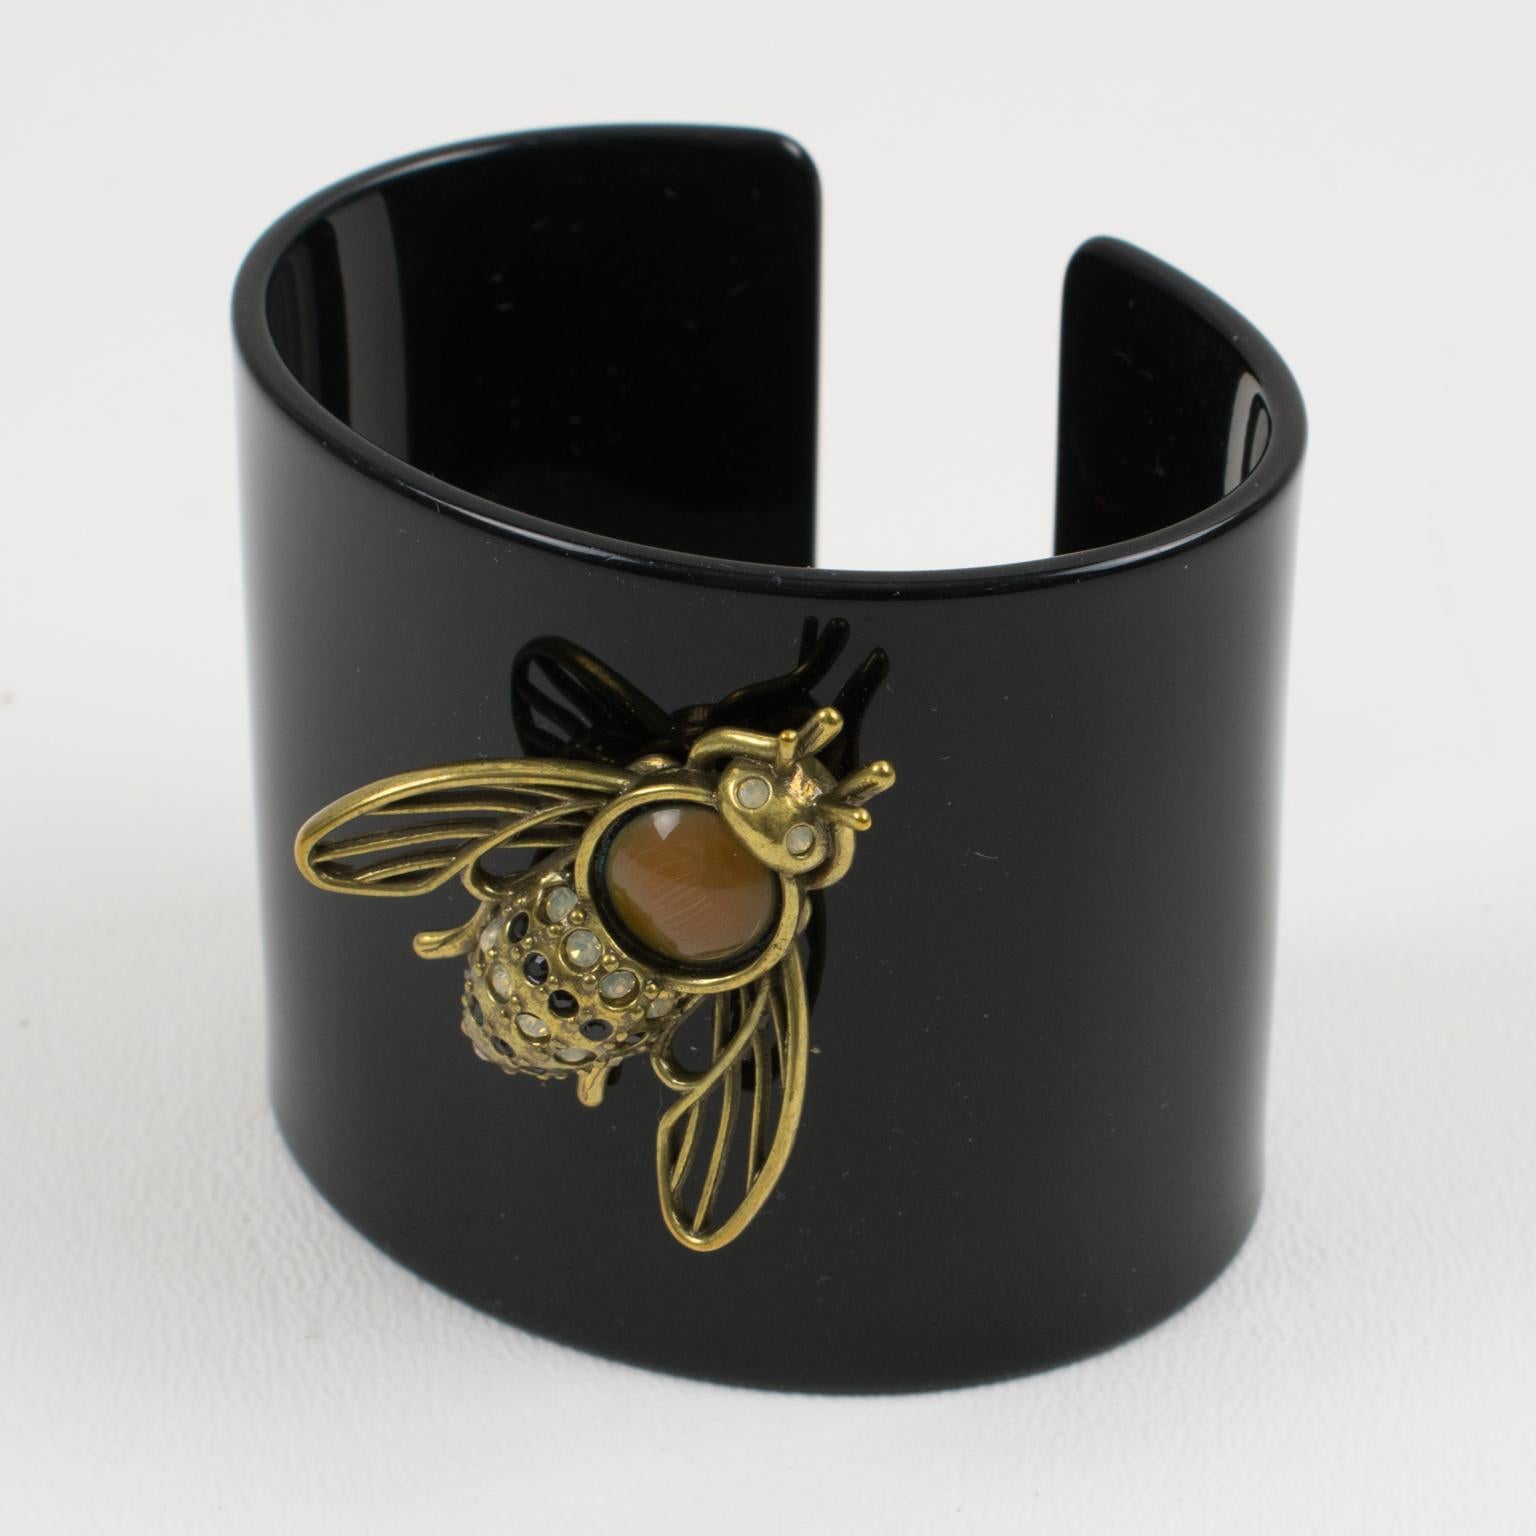 This is a lovely Jean Paul Gaultier Paris oversized black resin cuff bracelet with gilded brass bee embellishment. The bee is ornate with black and white-opalescent crystal rhinestones and topped with a large British tan poured glass cabochon. The